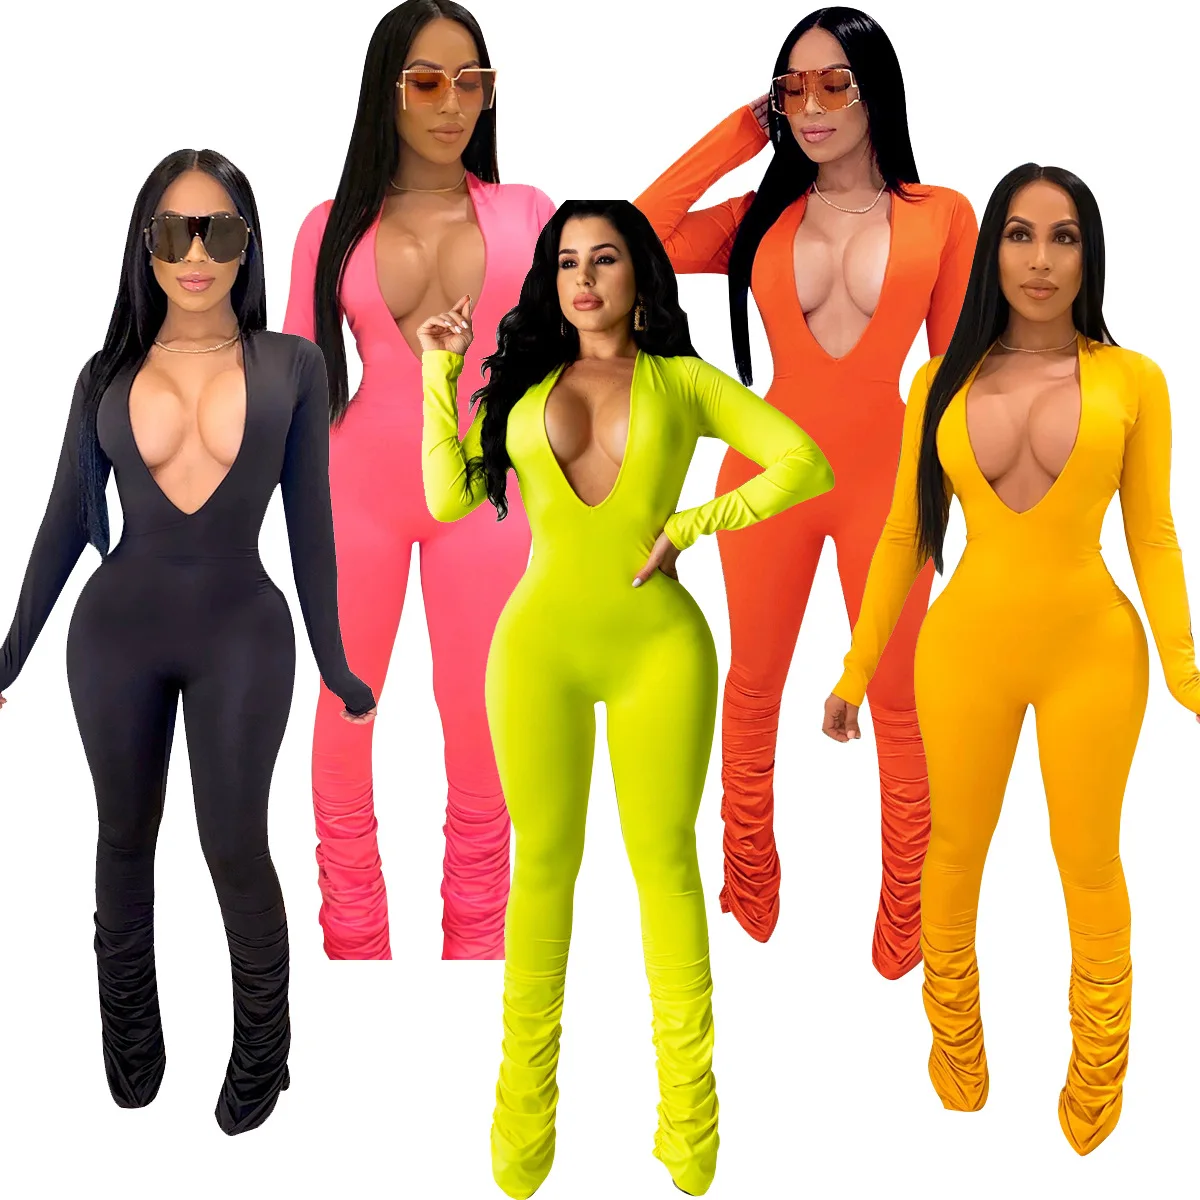 

Hot Selling Deep V Neck Sexy Bodycon Jump Suits Party Work Clothes Stacked Tight One Piece Women Jumpsuits, Pink, black, yellow, orange, green